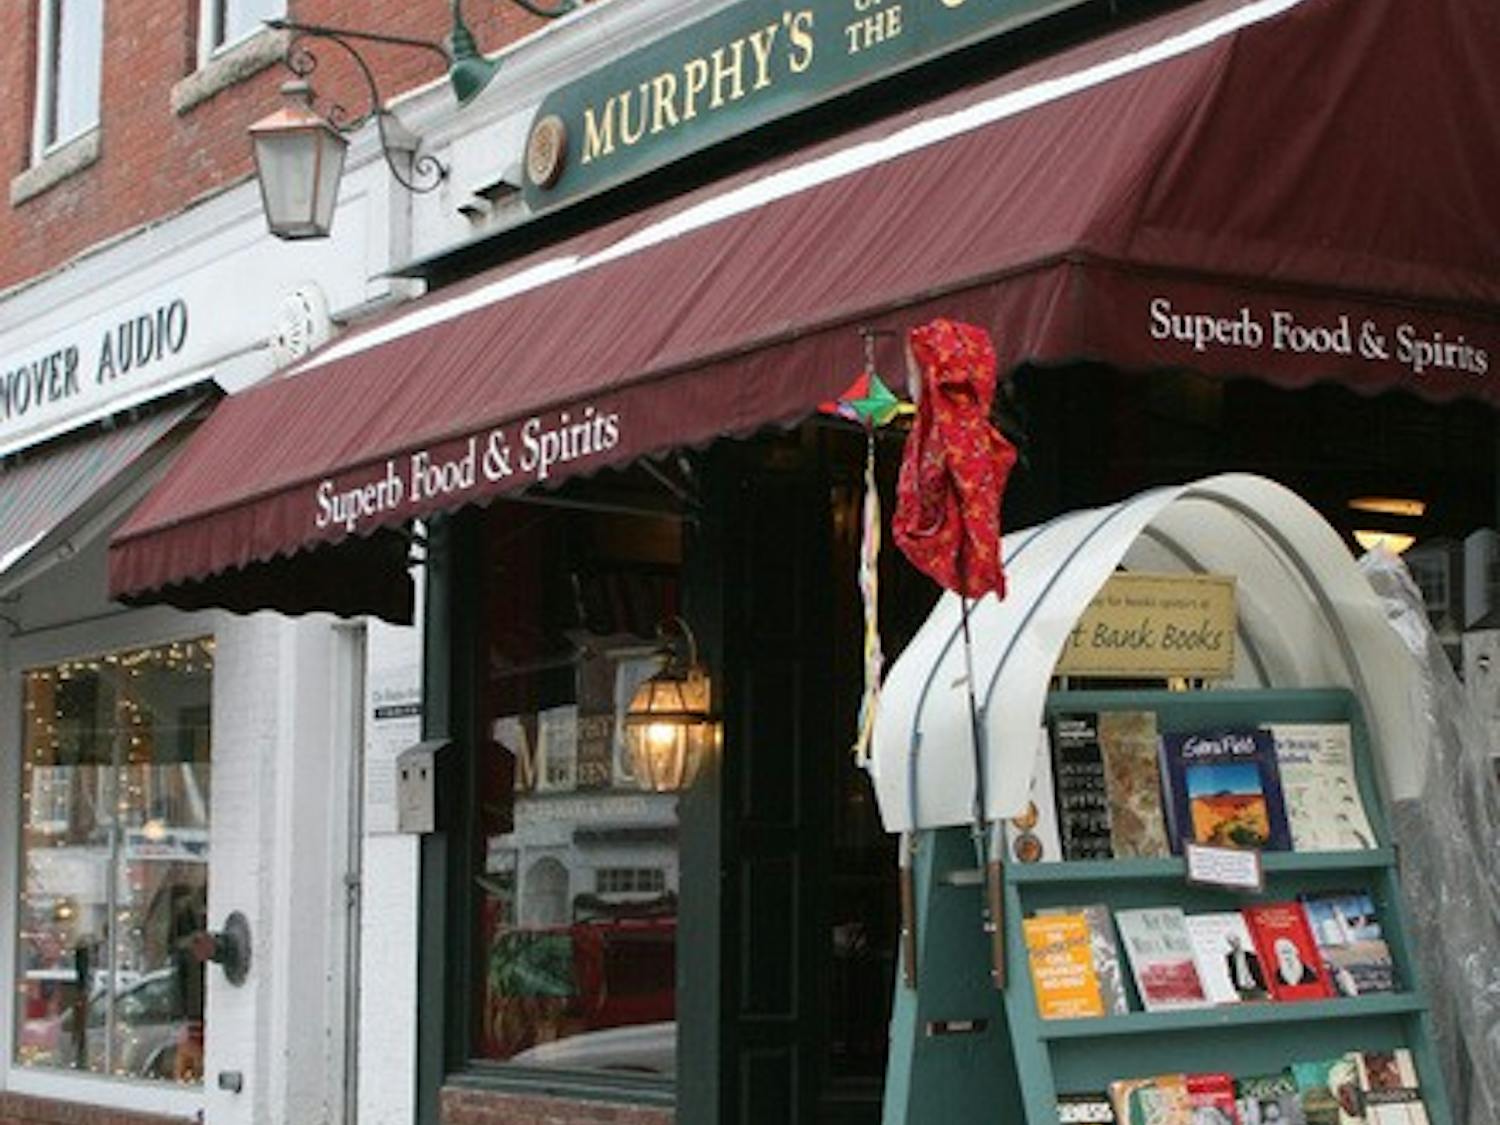 Murphy's on the Green, located on Main Street, is undertaking an estimated $40,000 to $50,000 in renovations that closed it down during First Year Family Weekend. The restaurant's management says it will reopen on Friday.